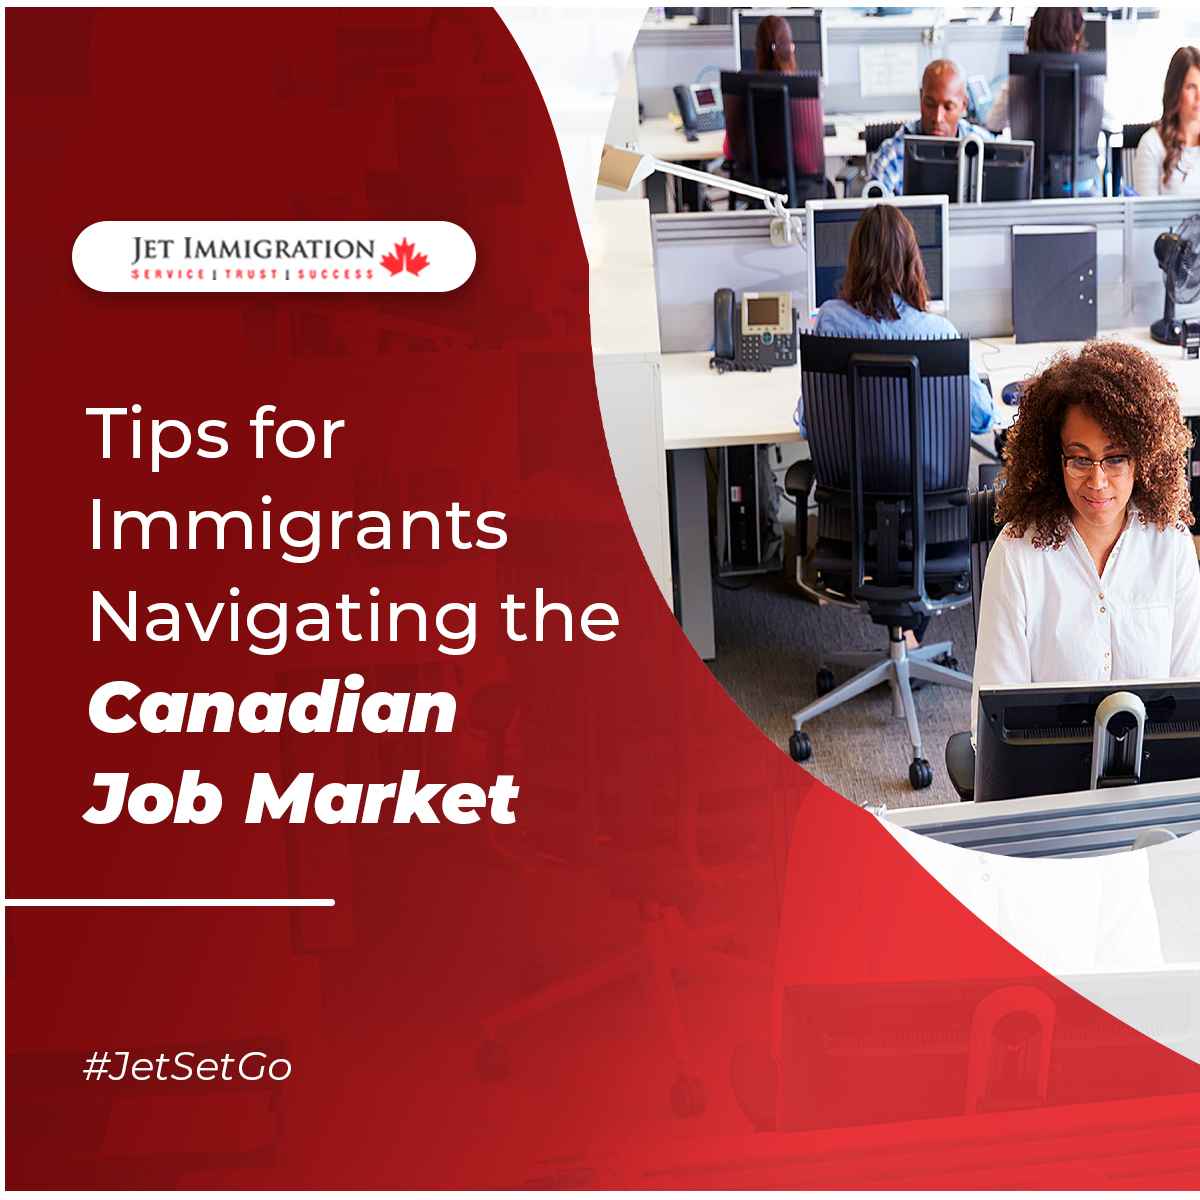 Tips for Immigrants Navigating the Canadian Job Market